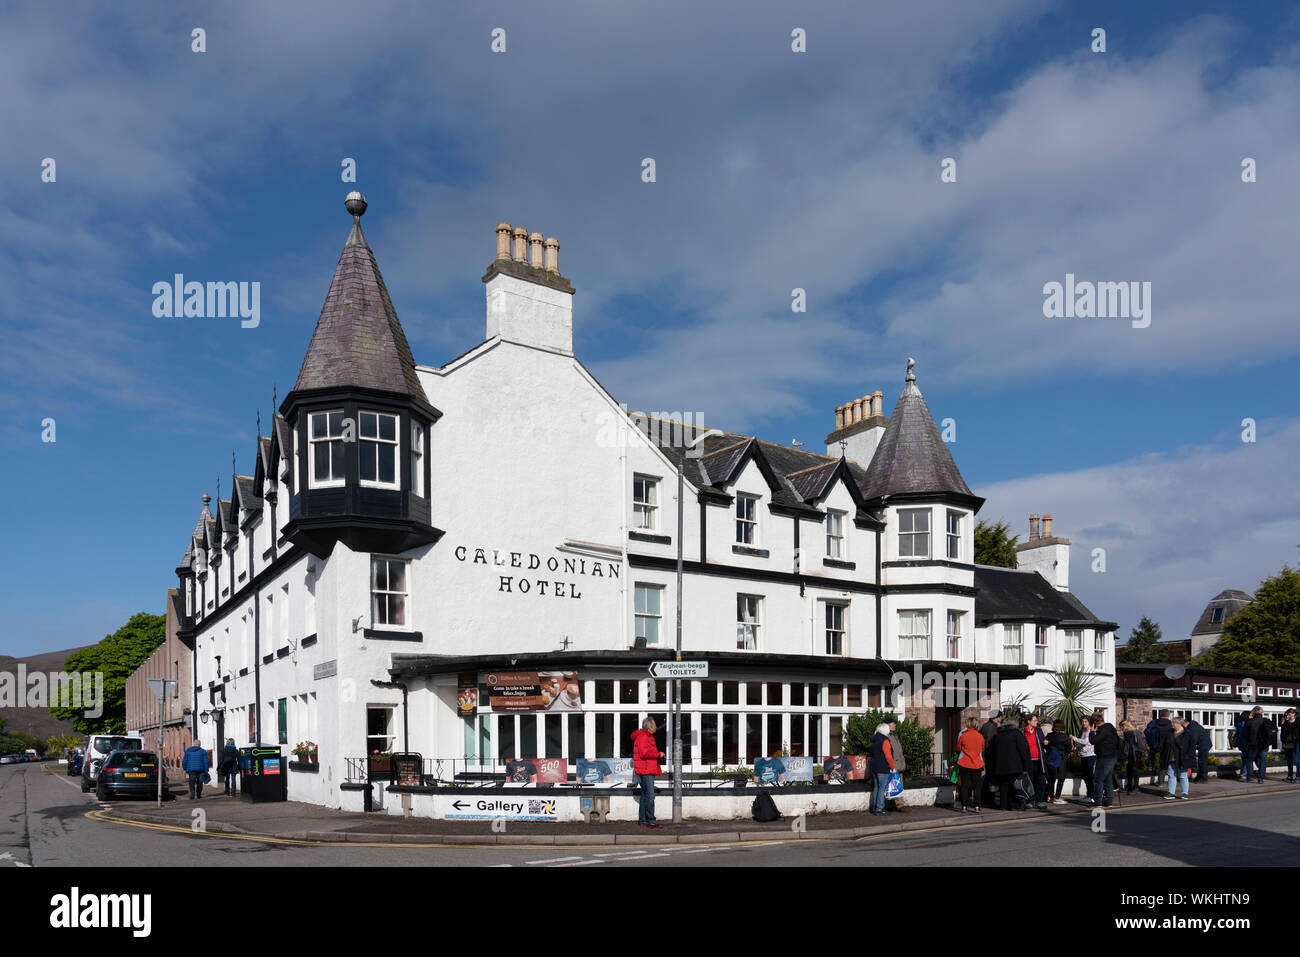 Caledonian Hotel in Ullapool on the North Coast 500 tourist motoring route in northern Scotland, UK Stock Photo